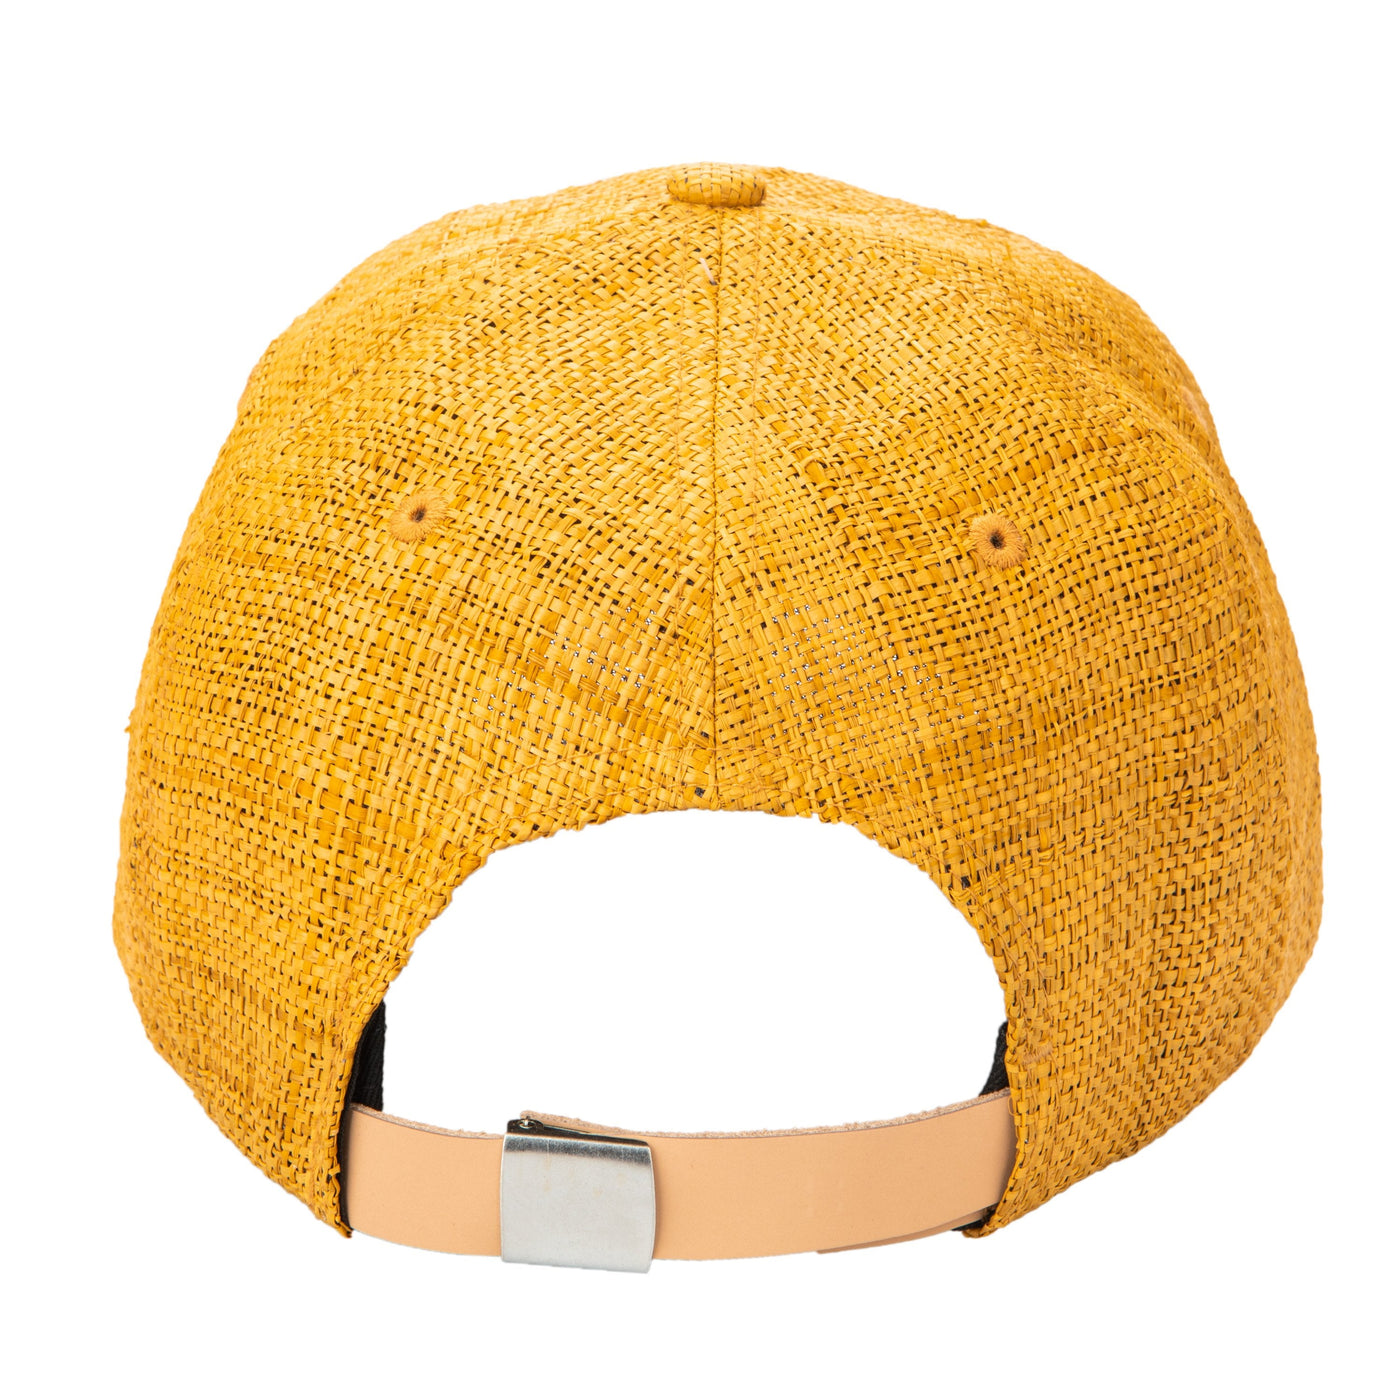 CAP - Women's Woven Raffia Ball Cap With Leather Adjustable Back (CTH4087)